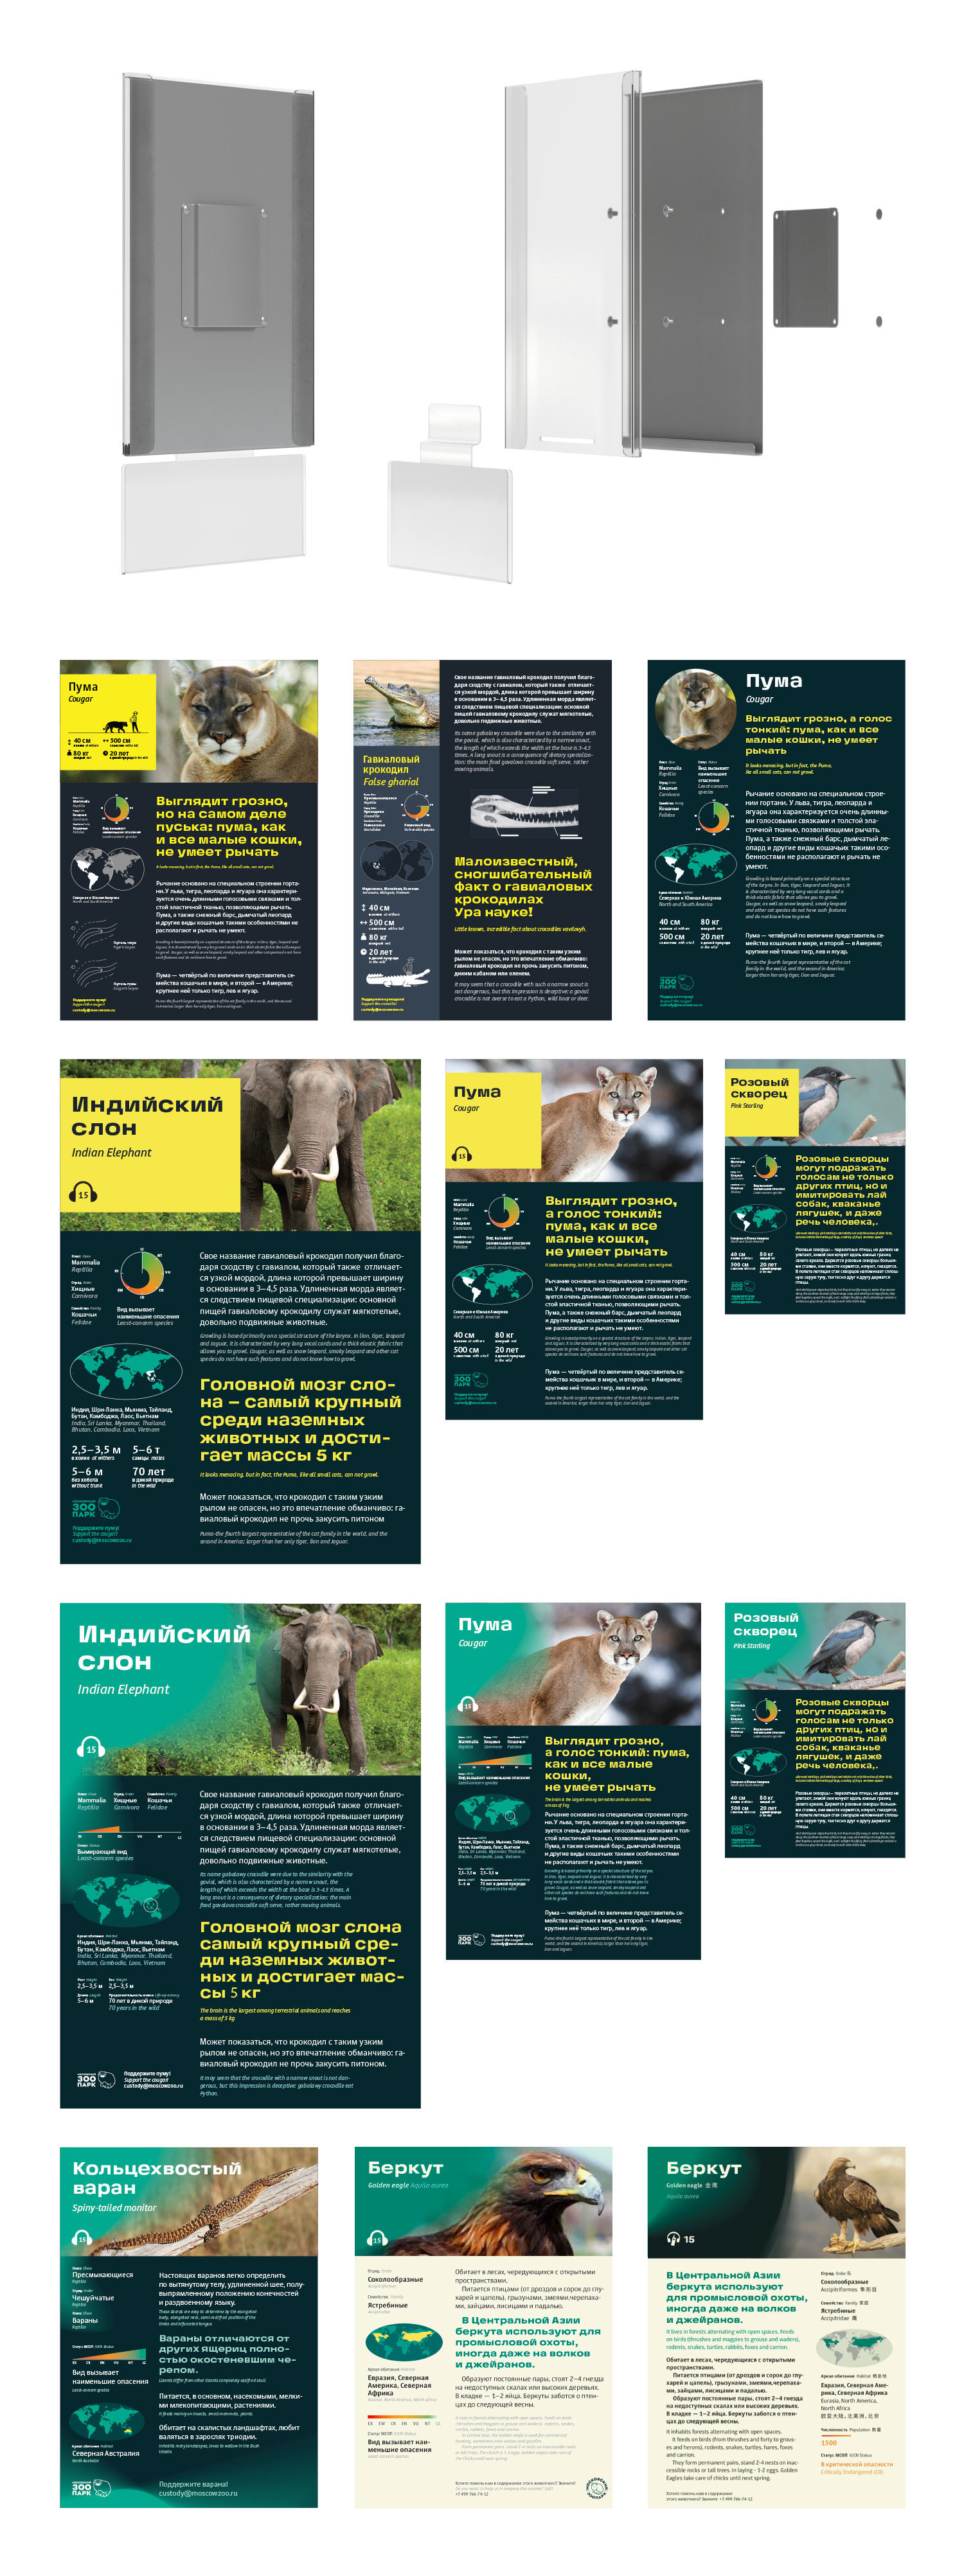 moscow zoo navigation process 19